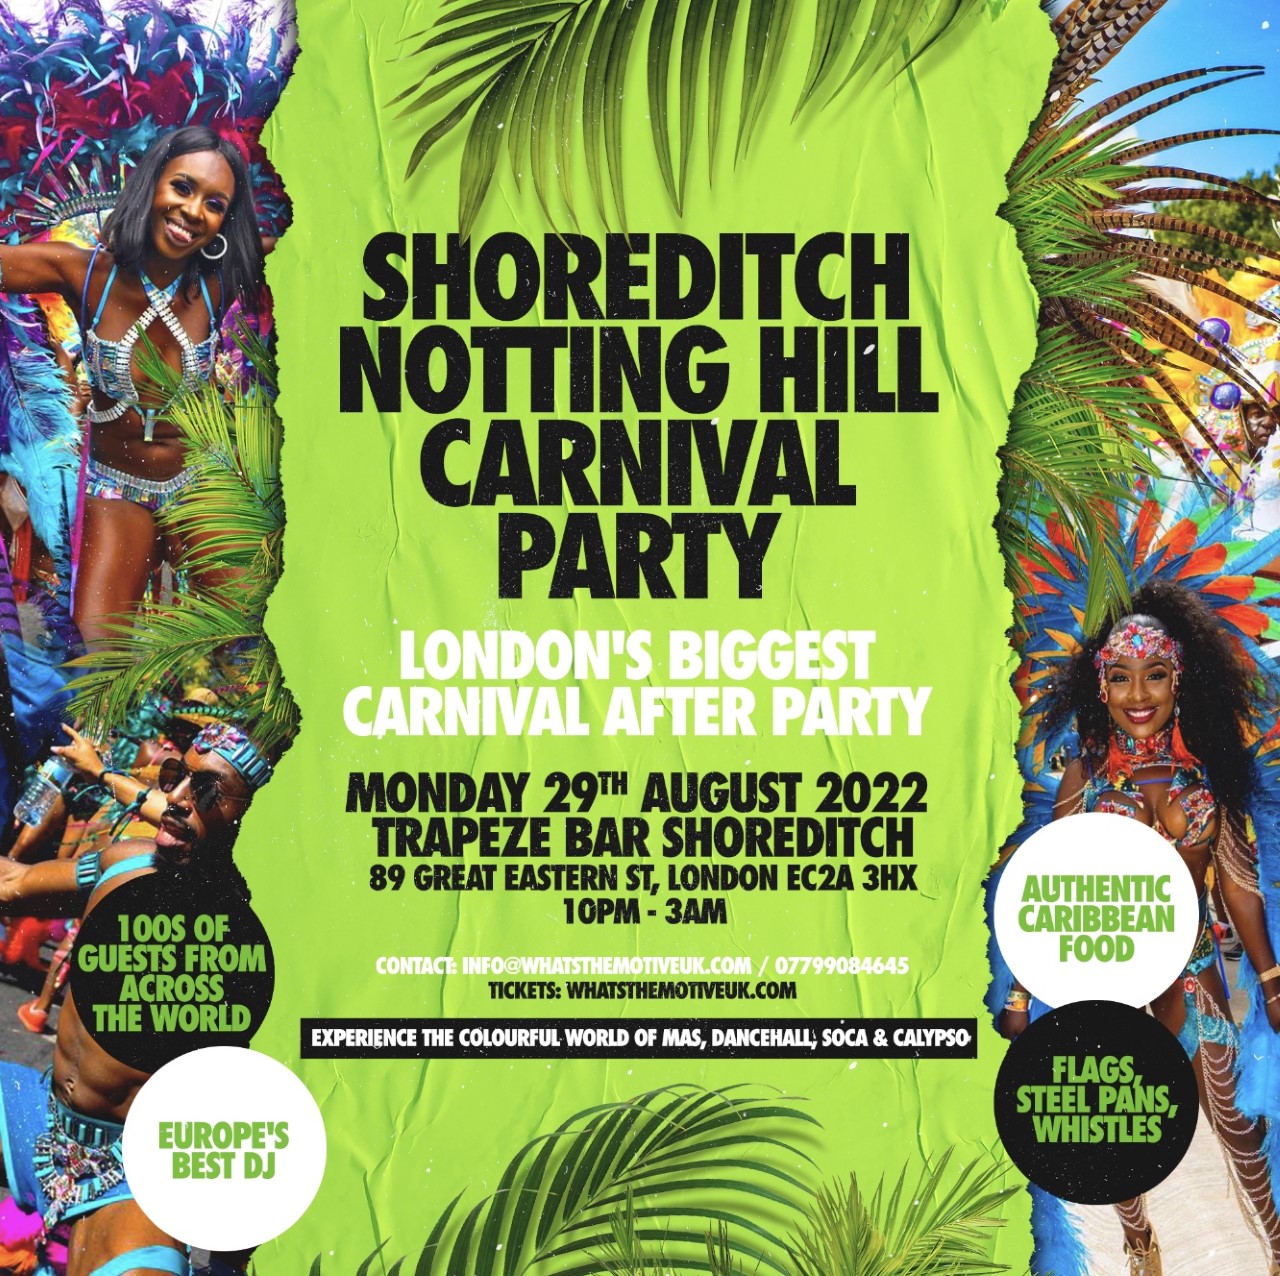 SOUTH LONDON NOTTING HILL CARNIVAL PARTY at Lit, London on 29th Aug